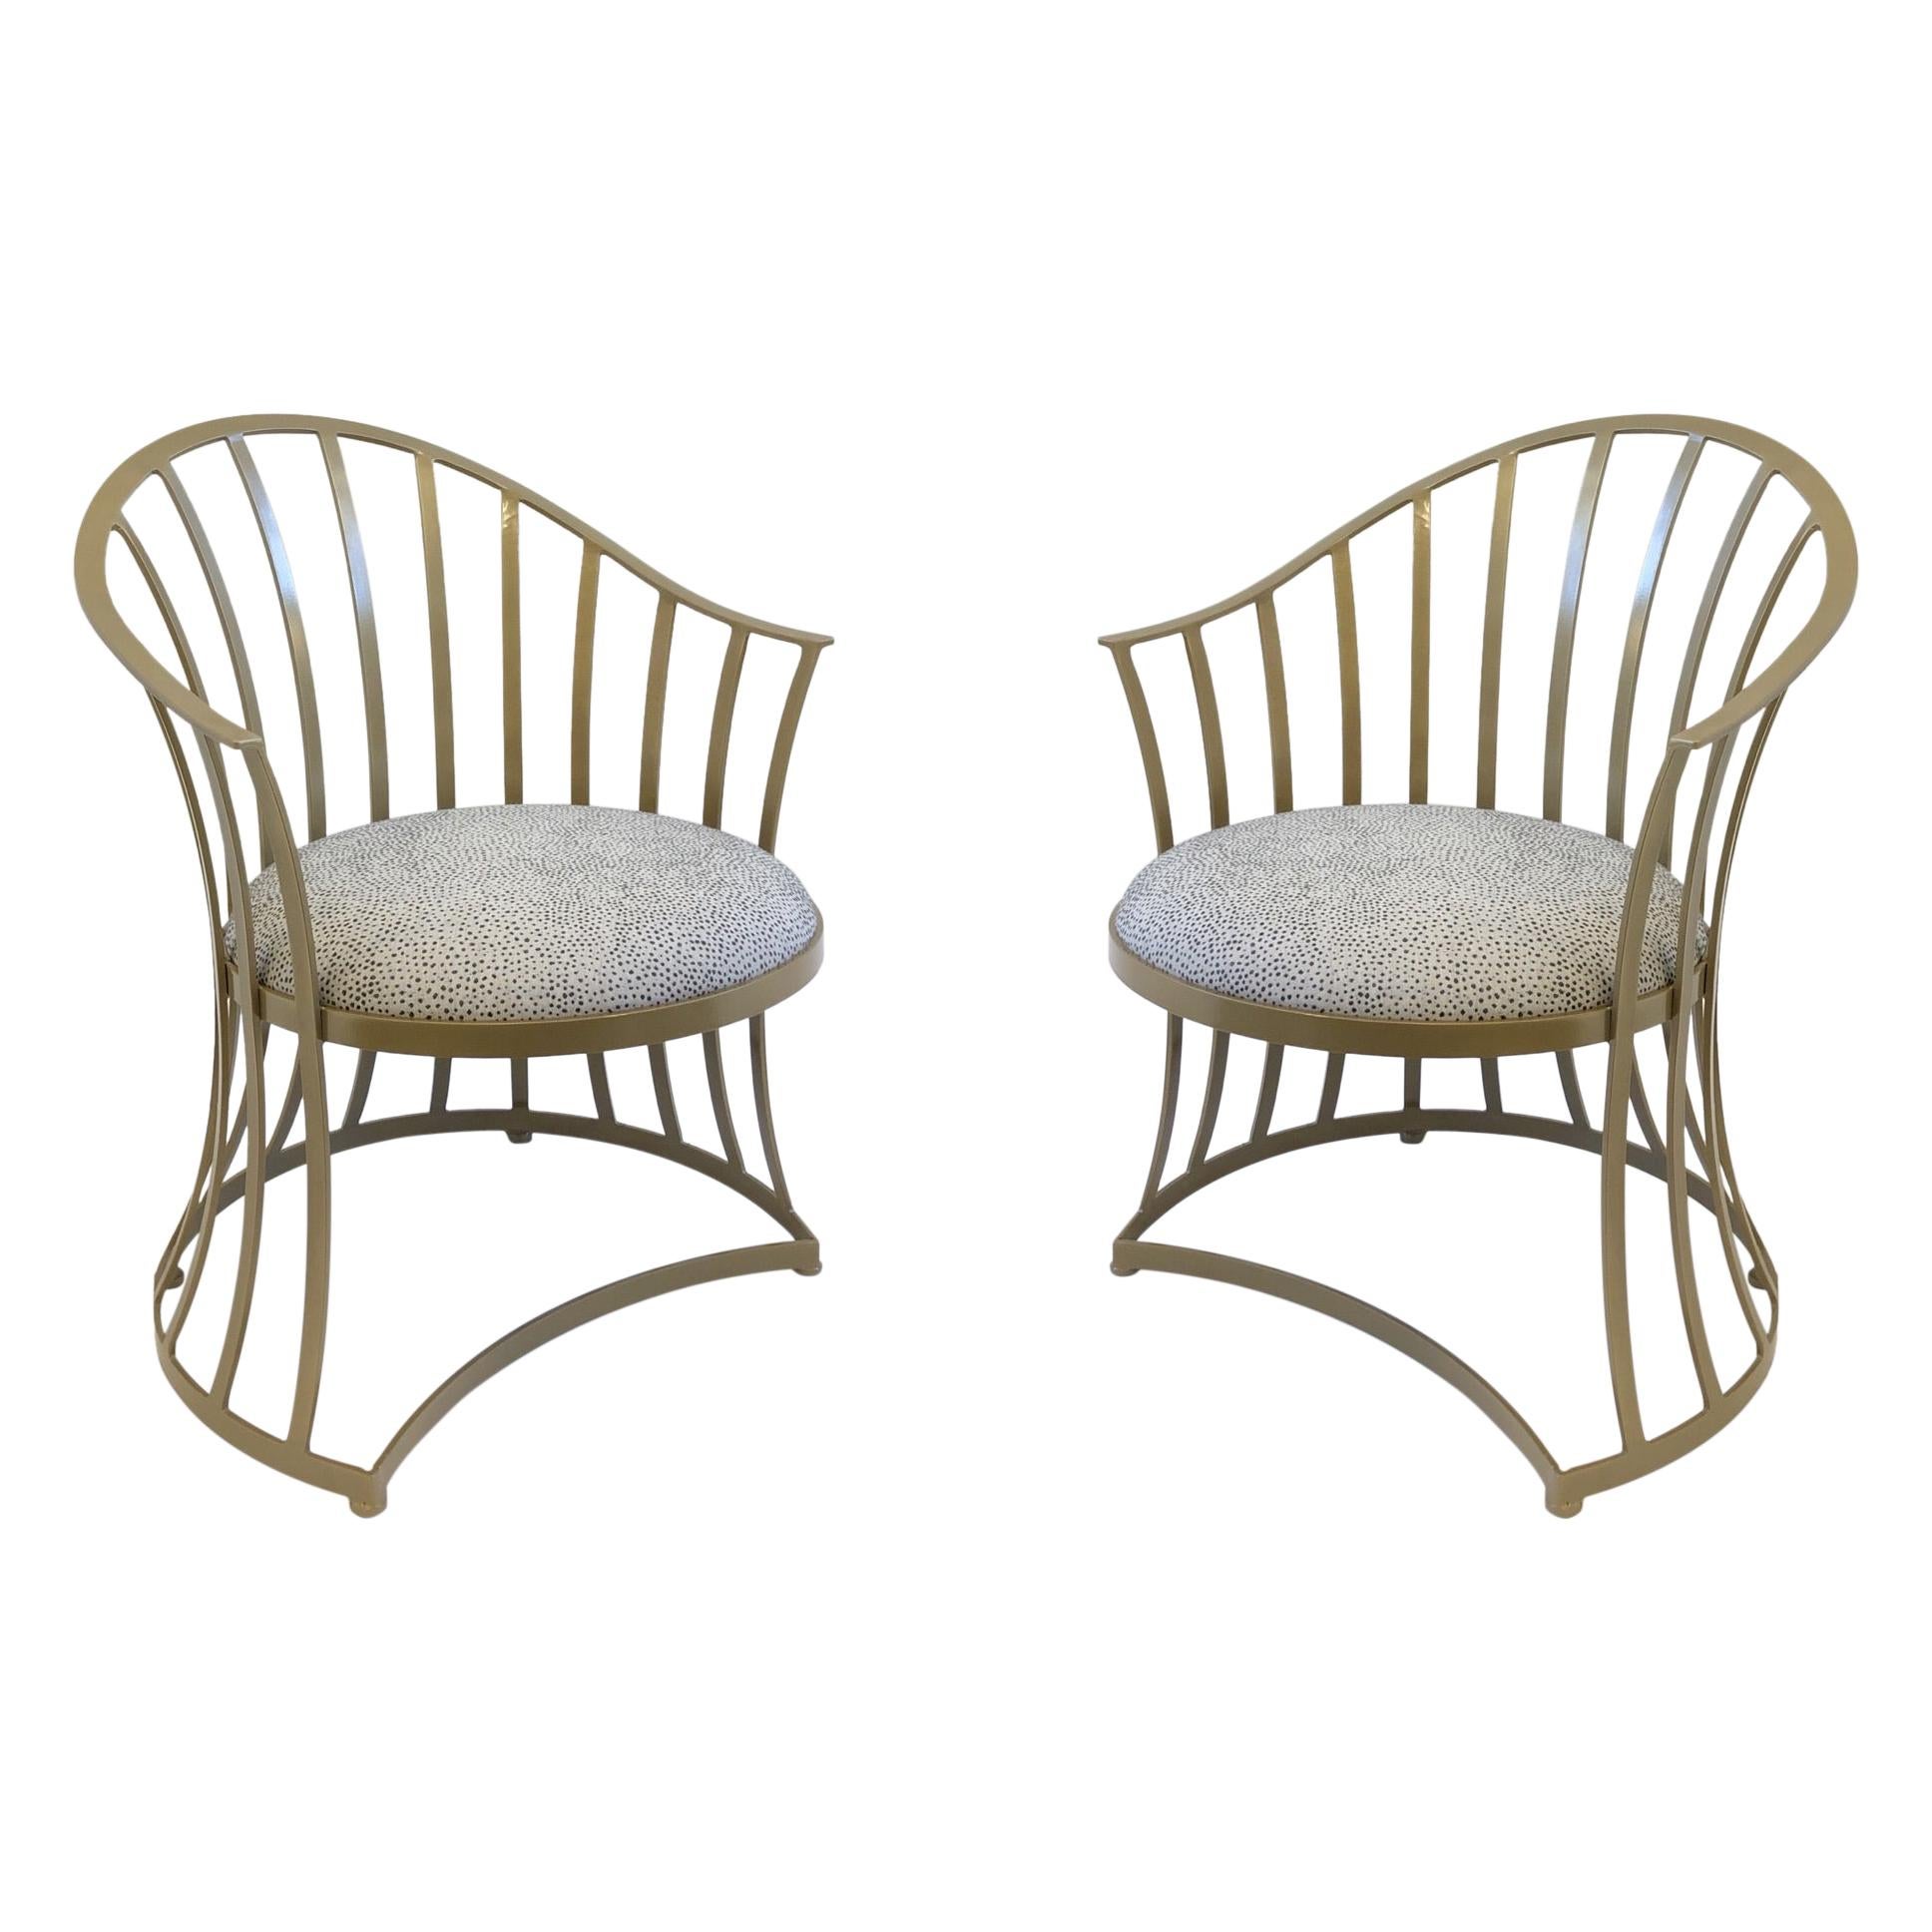 Pair of Gold Aluminum Patio Chairs by Russell Woodard